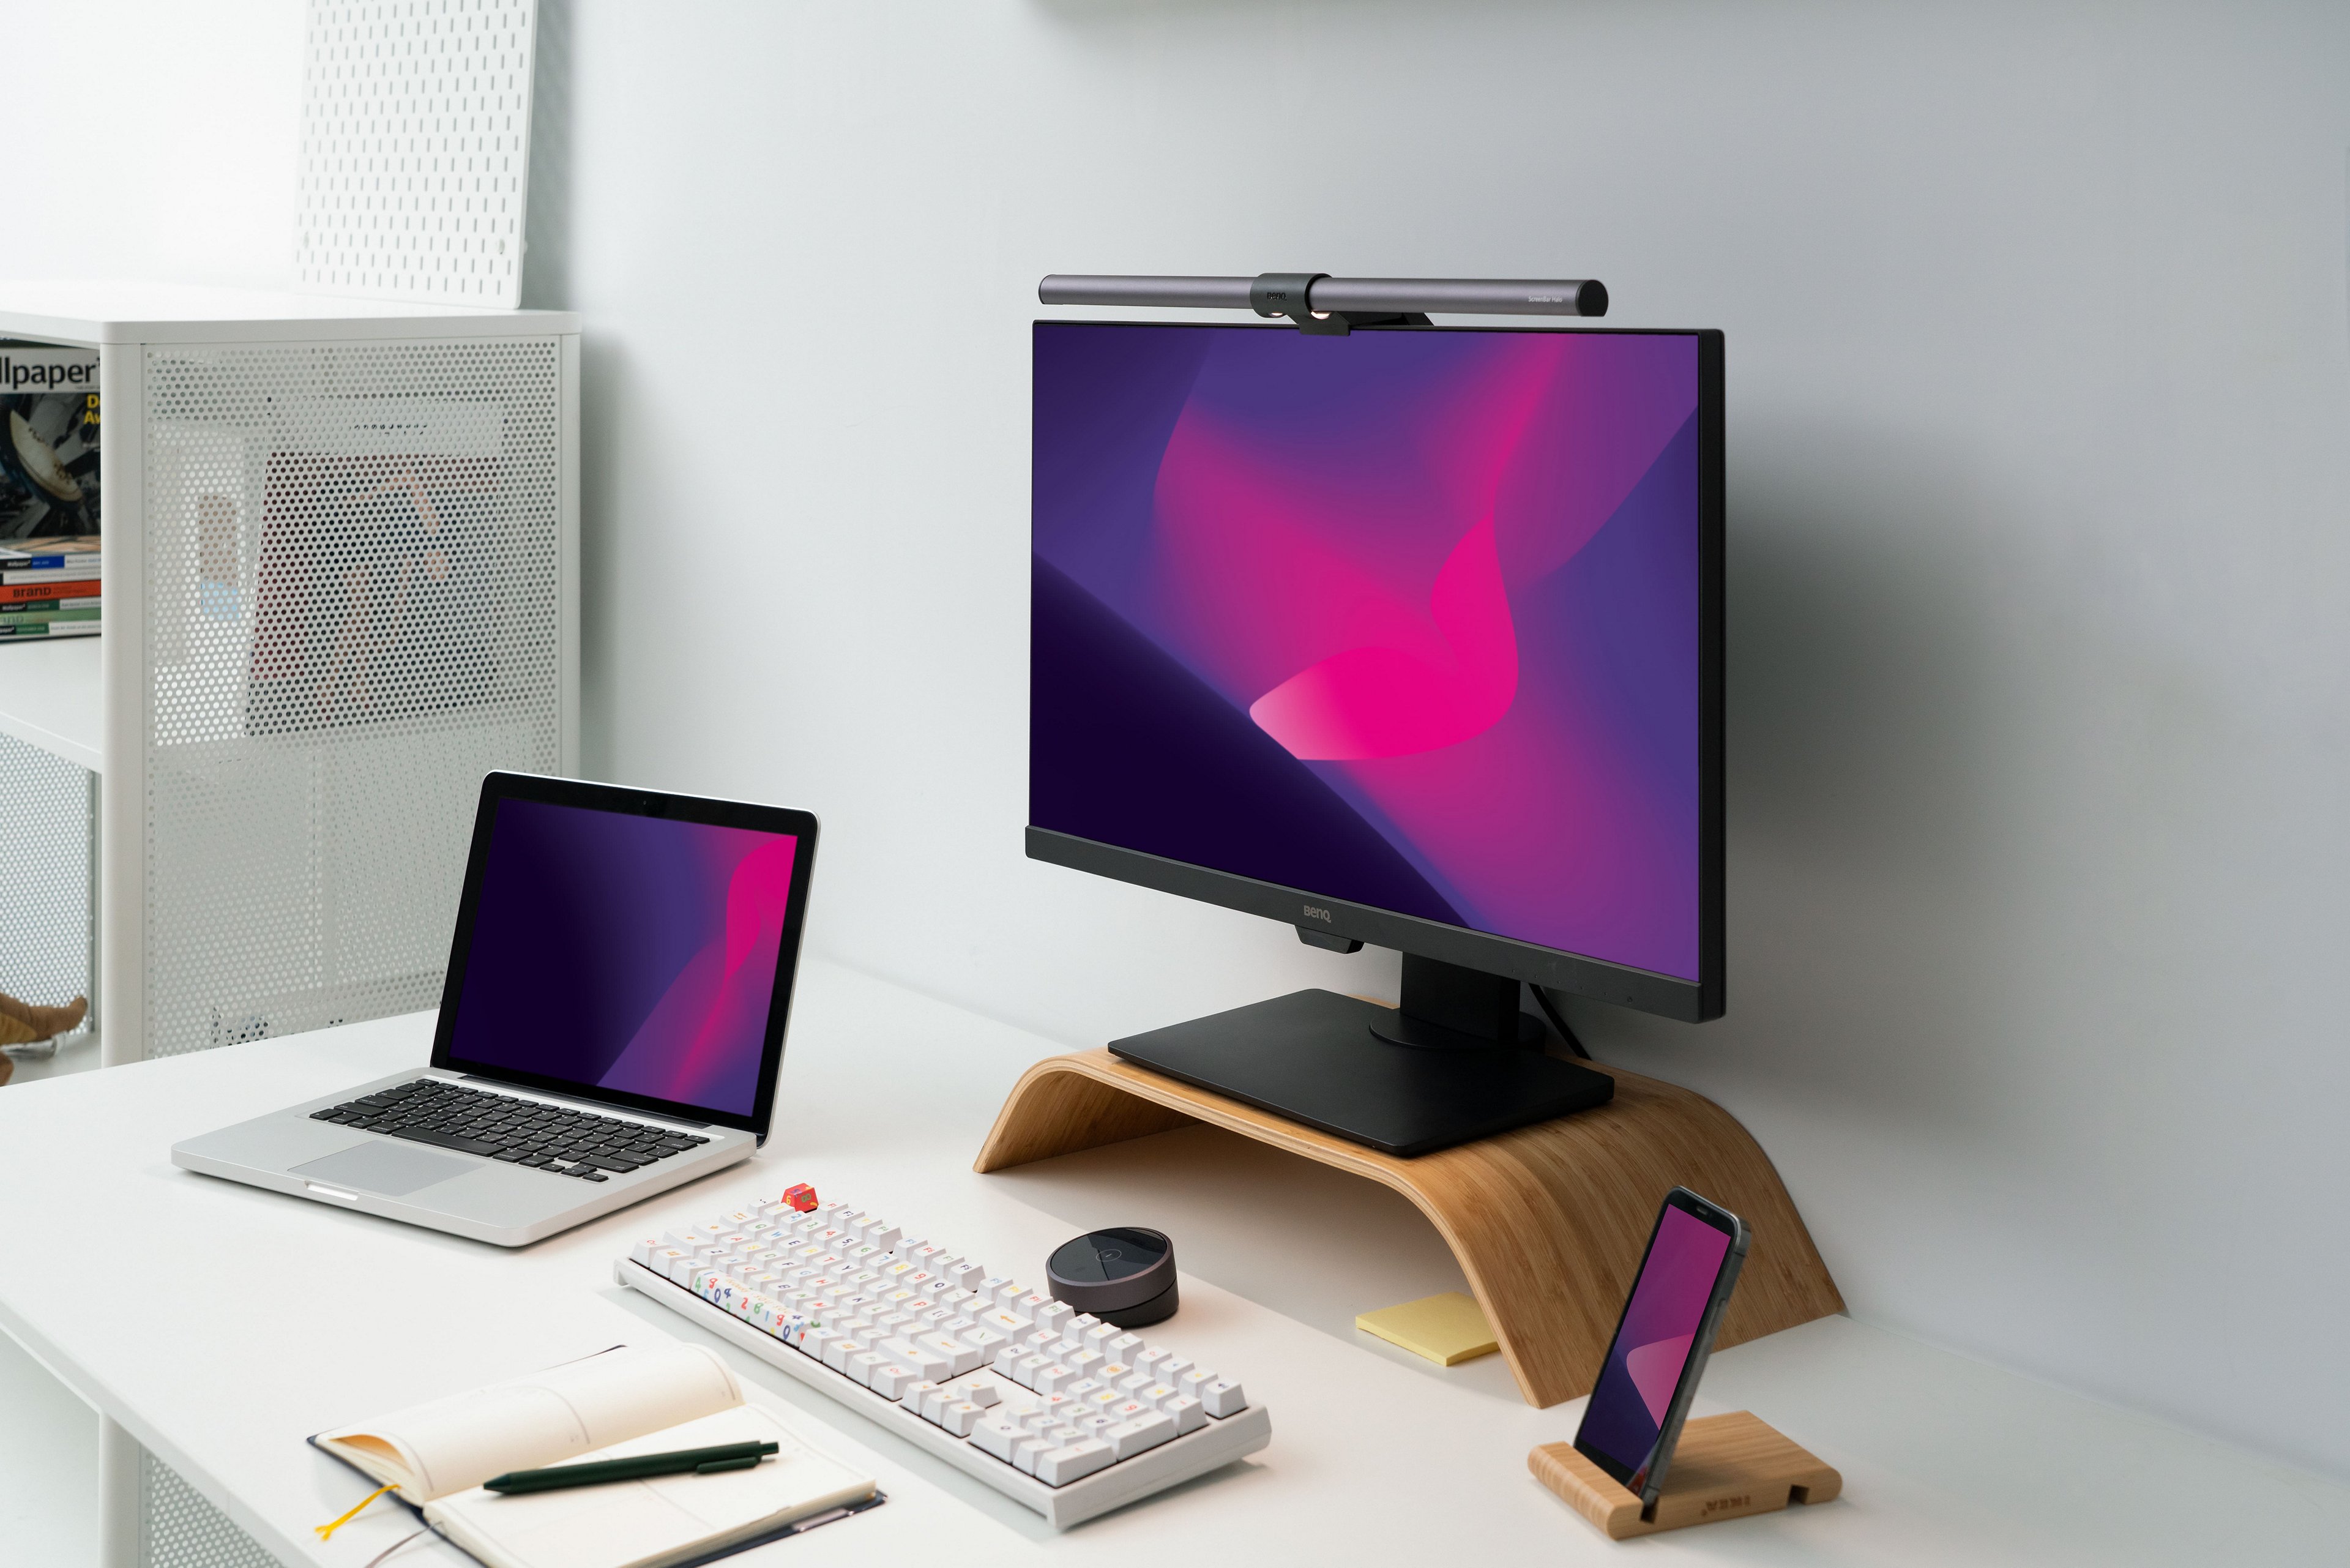 A monitor light bar is one of the must-have when it comes to laptop station setup ideas. 